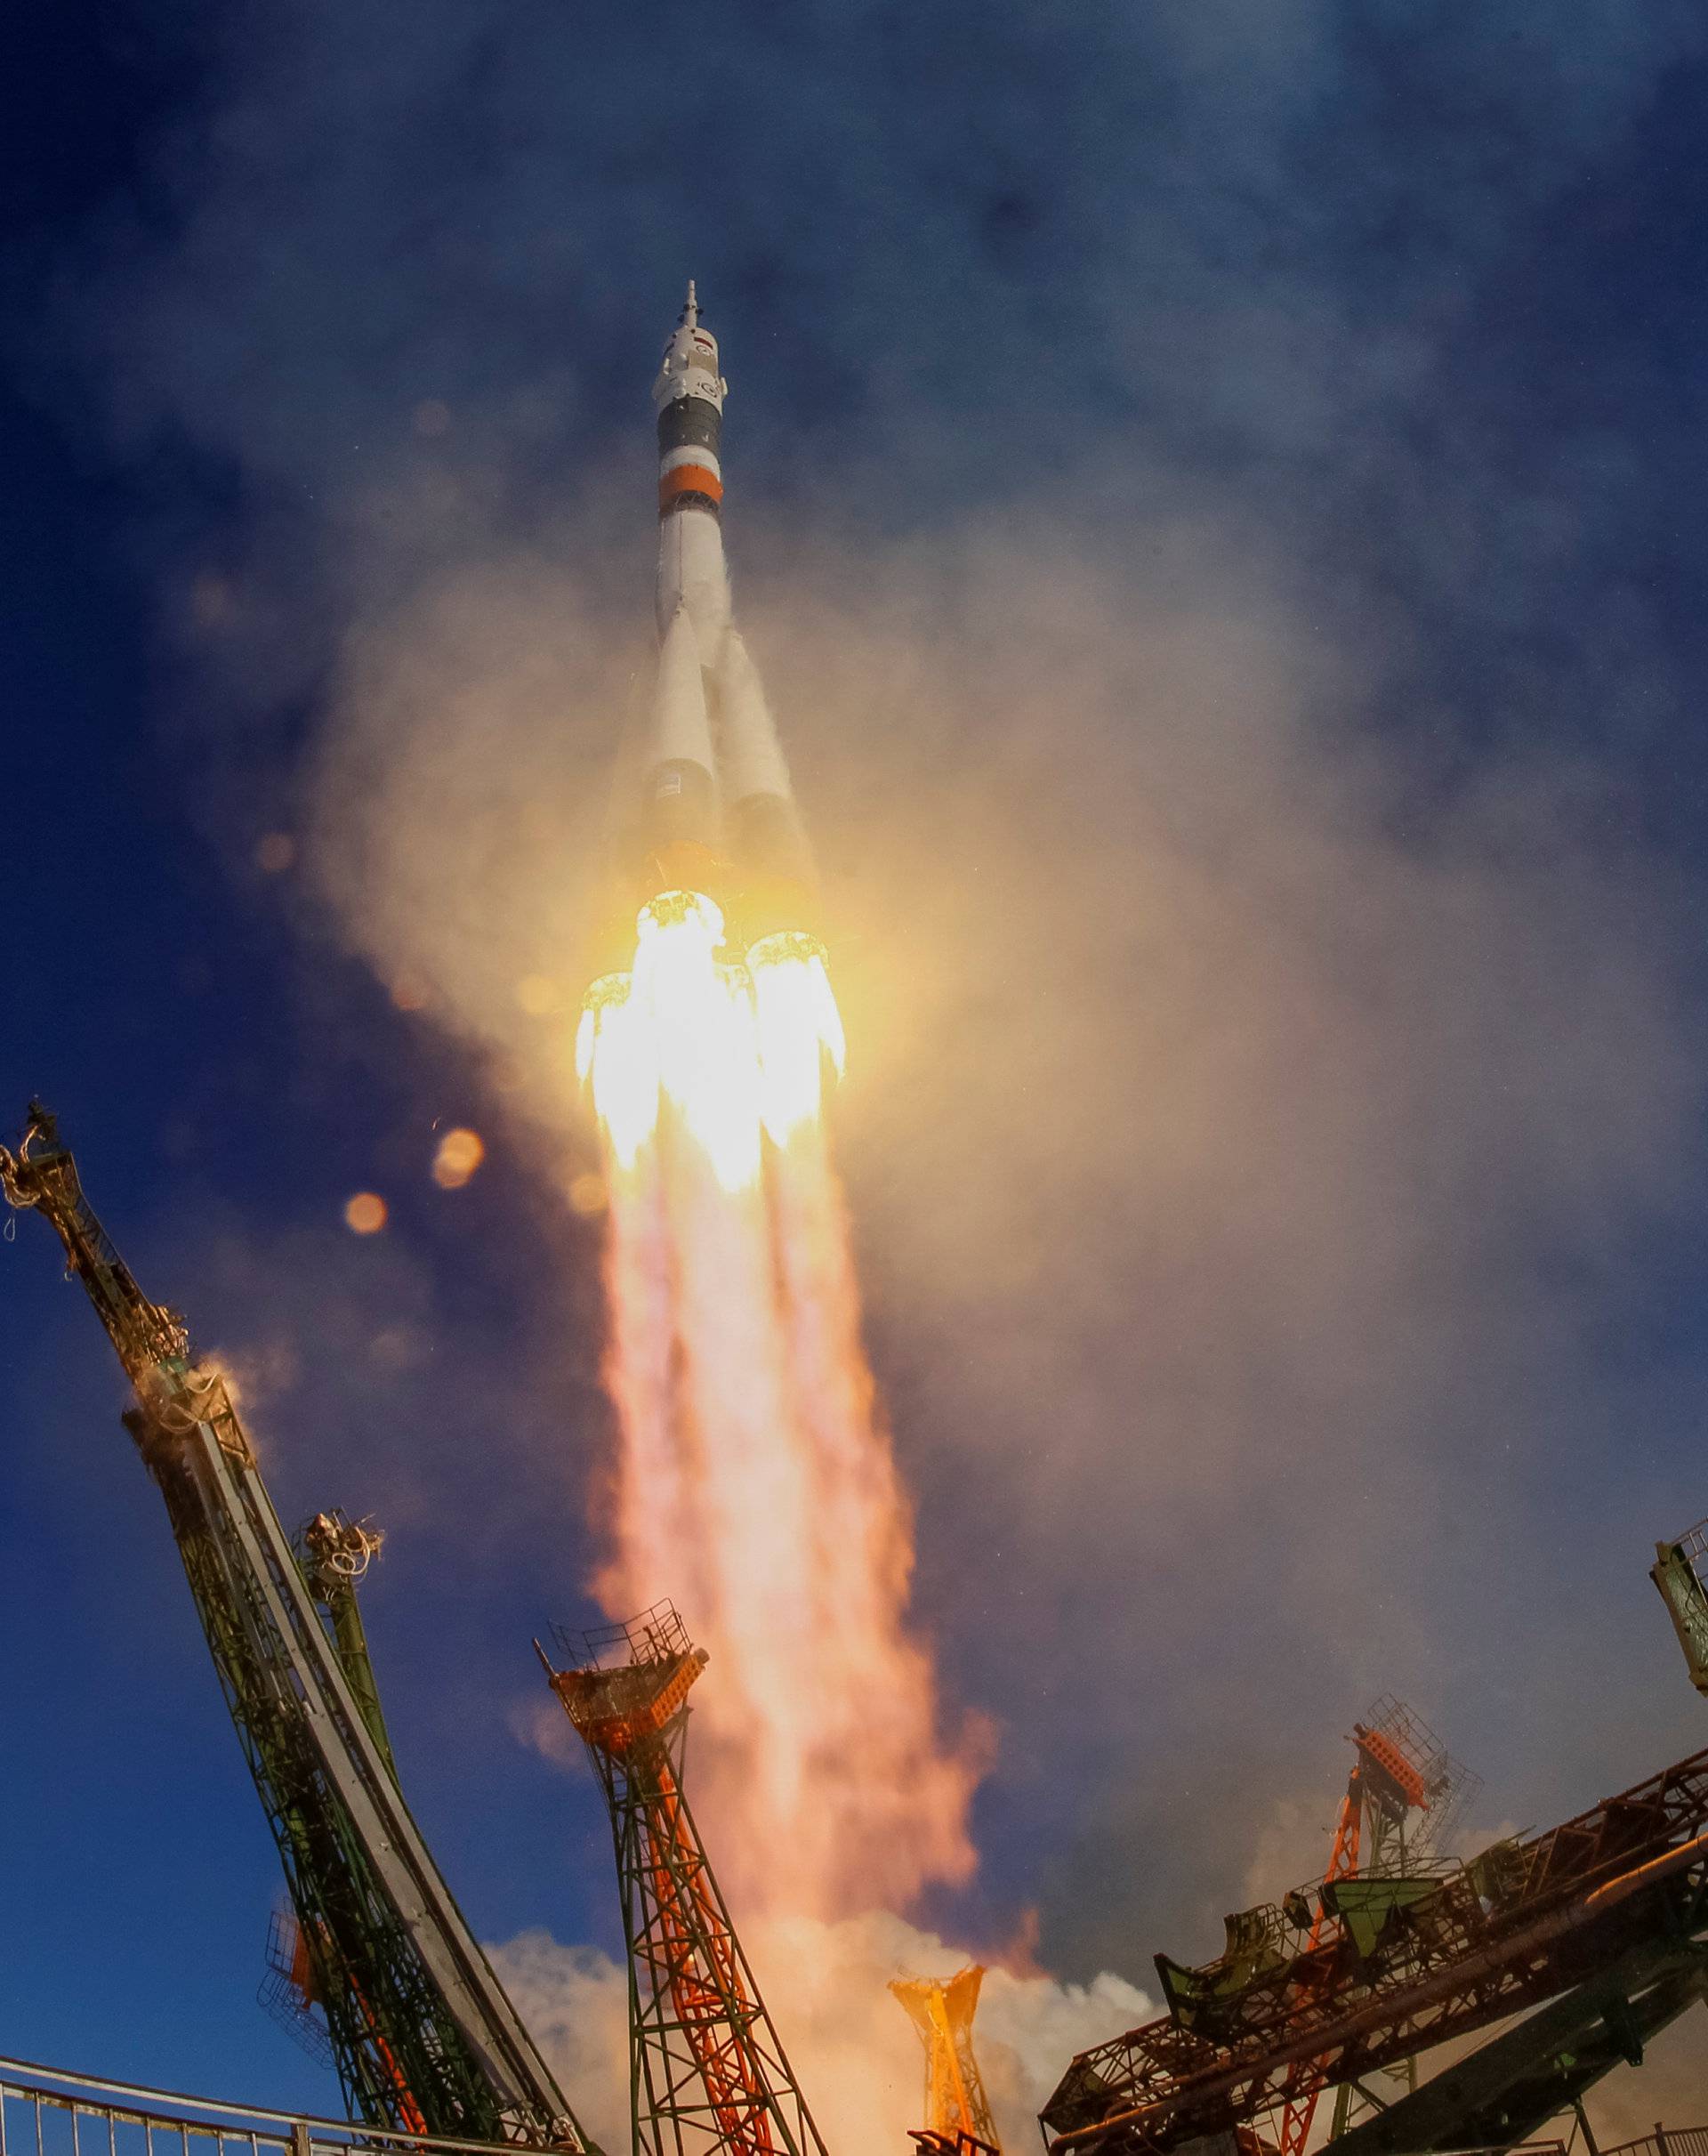 The Soyuz MS-07 spacecraft carrying the next International Space Station (ISS) crew blasts off from the launchpad at the Baikonur Cosmodrome